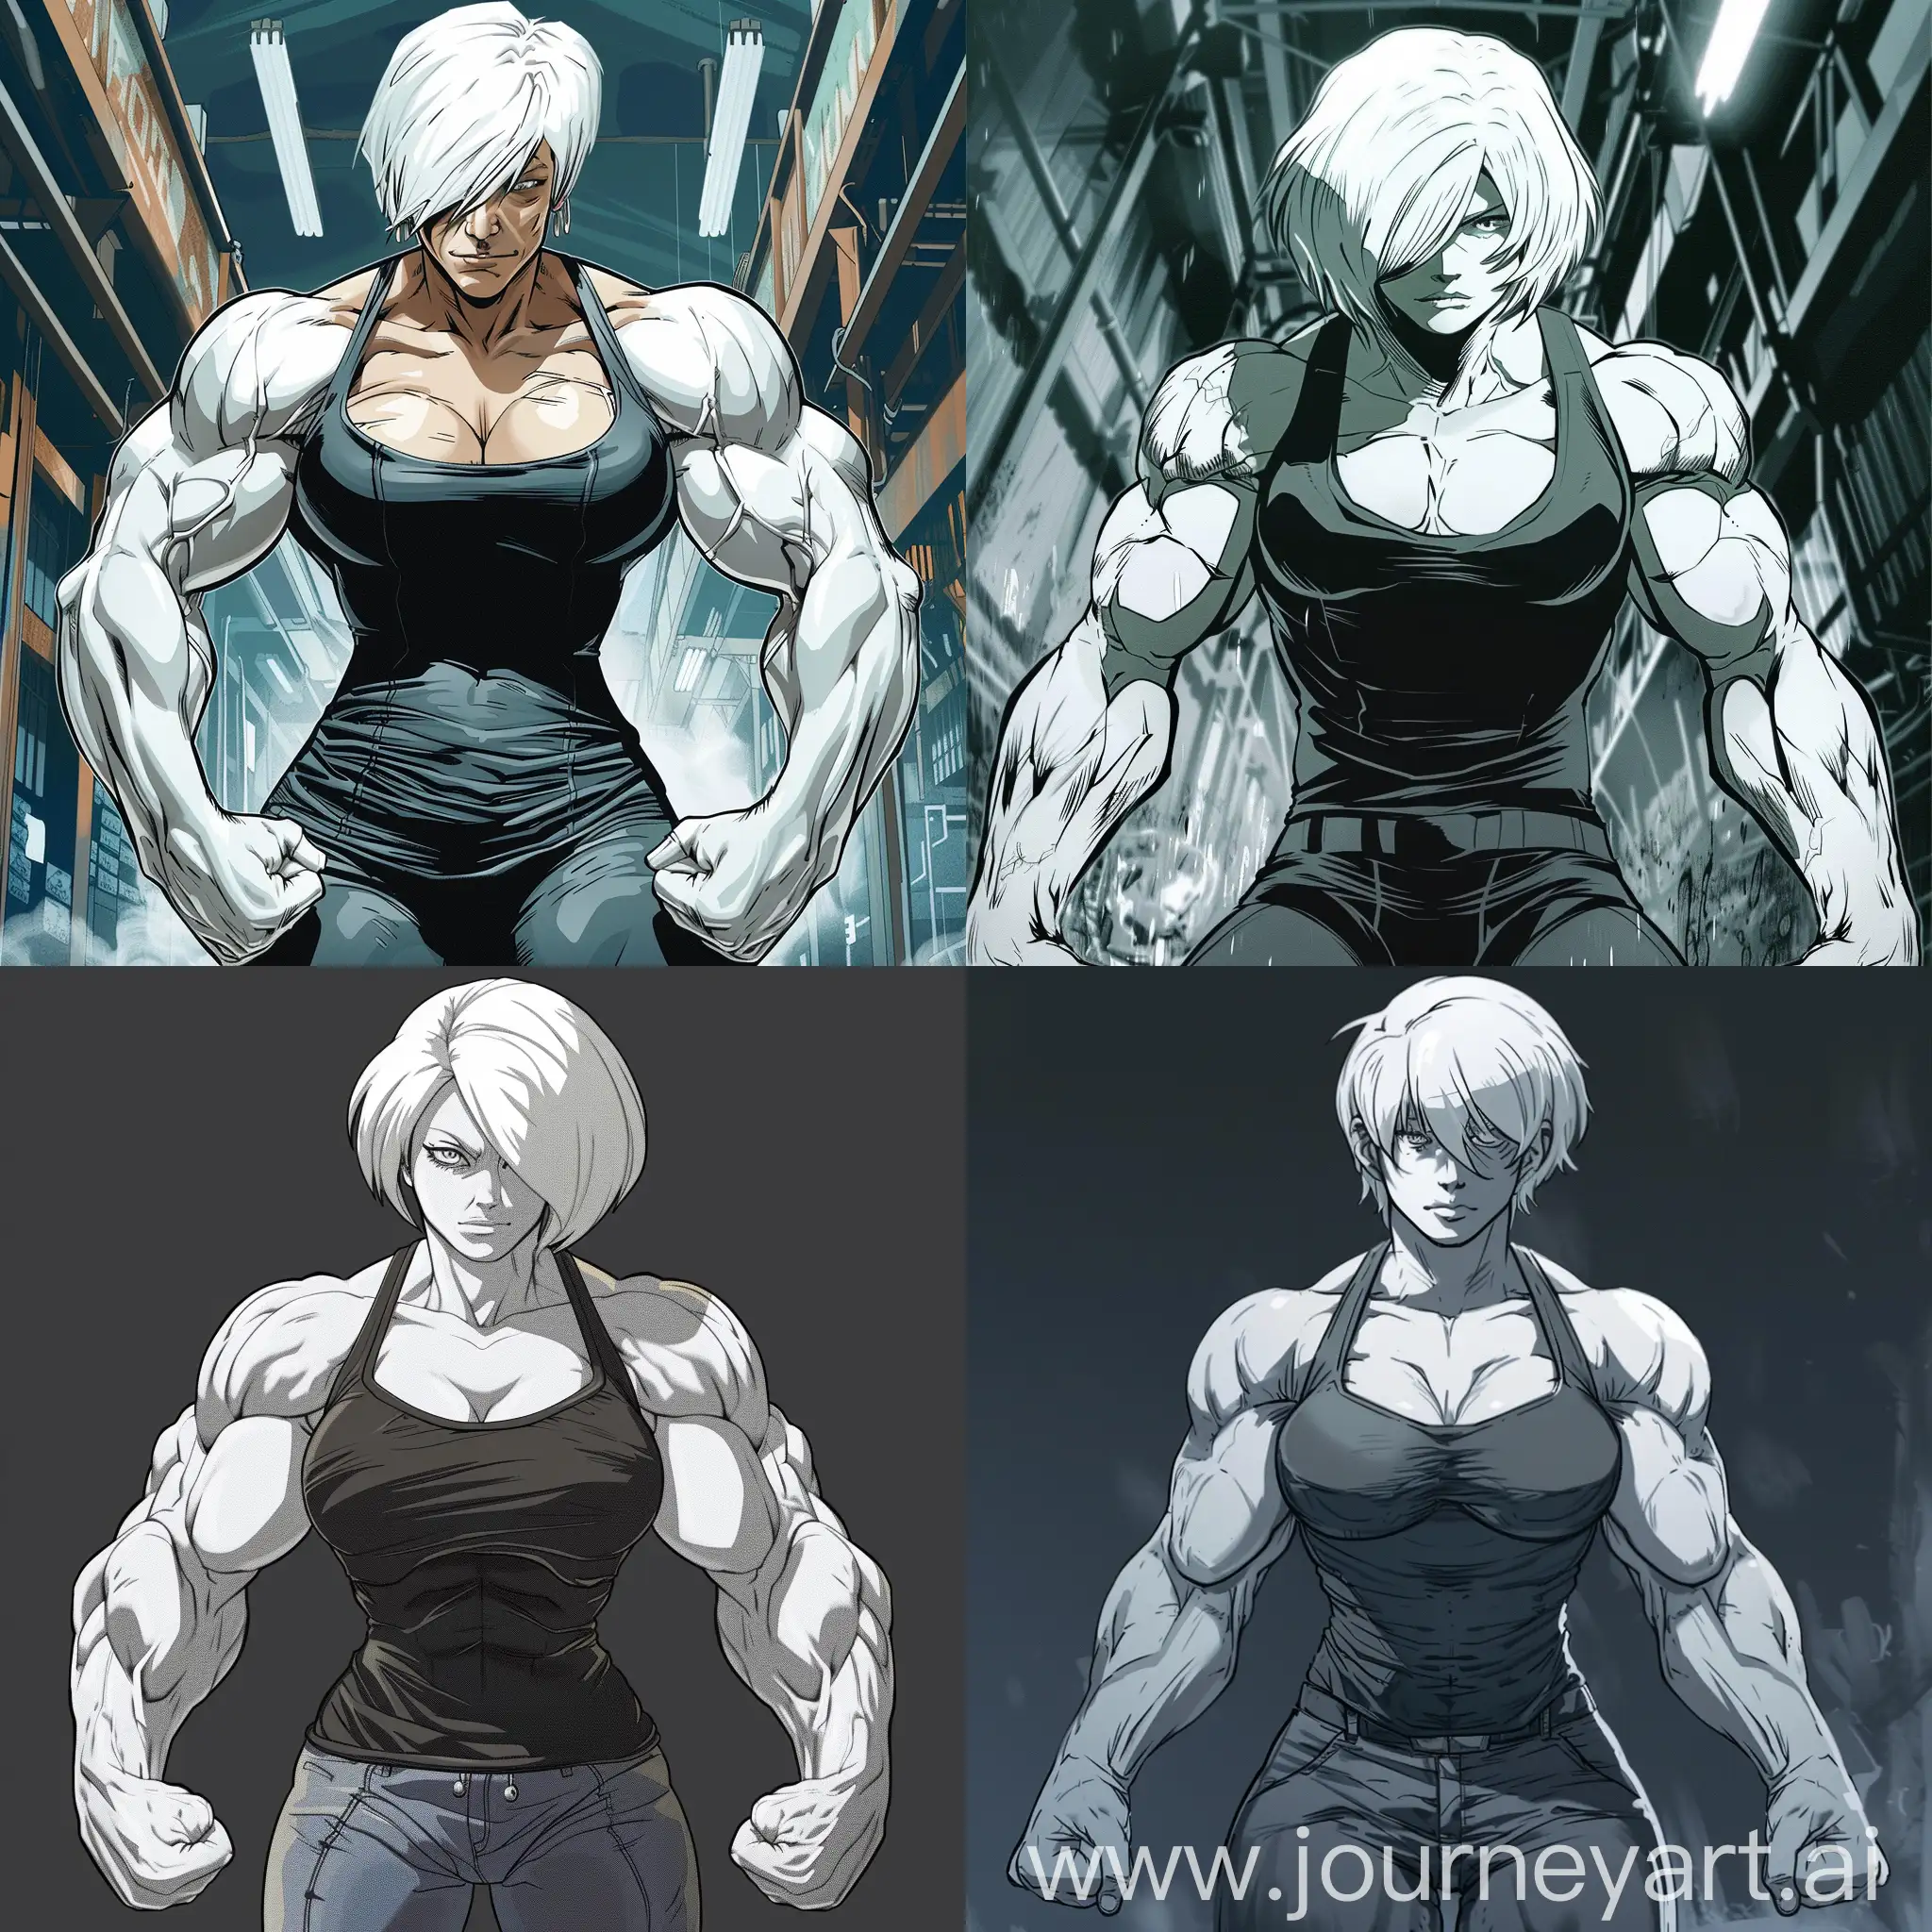 An image in comix style of a bulky muscular woman with strong arms pure very white skin androgynous looking, full body pose, with short white hair that hide her face.